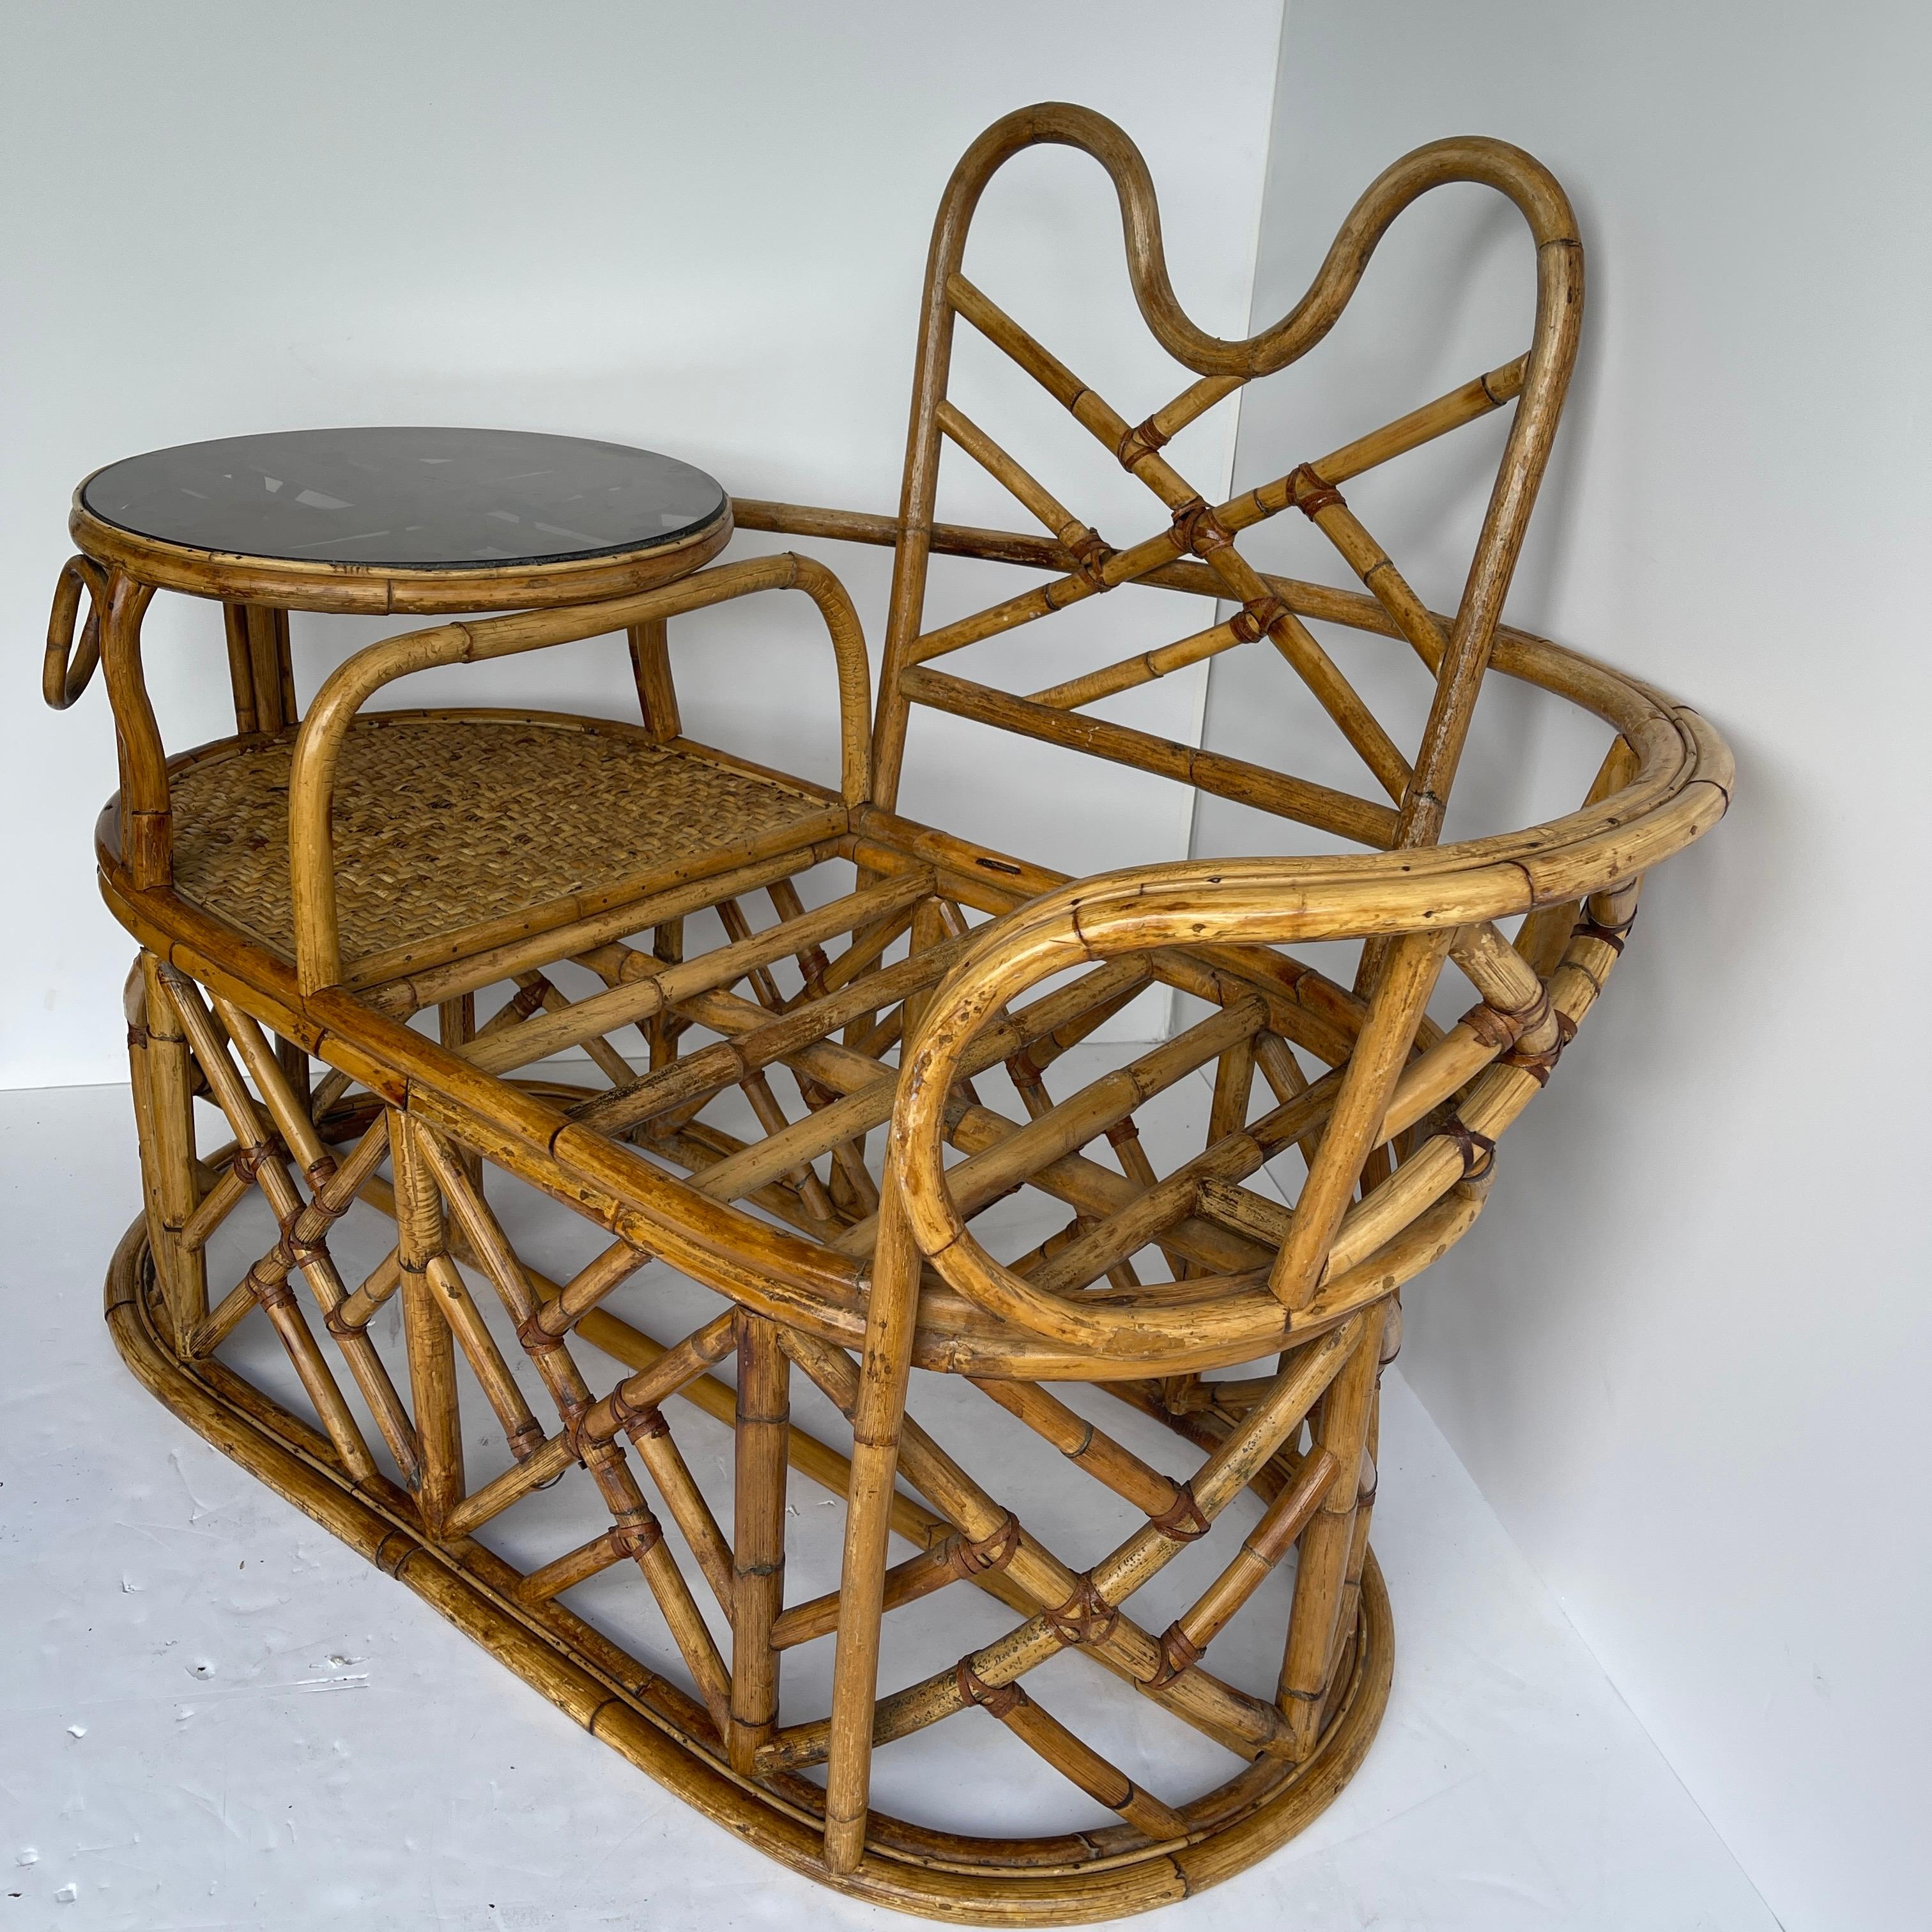 20th Century Mid-Century Modern Rattan Gossip Bench with Glass Top Table For Sale